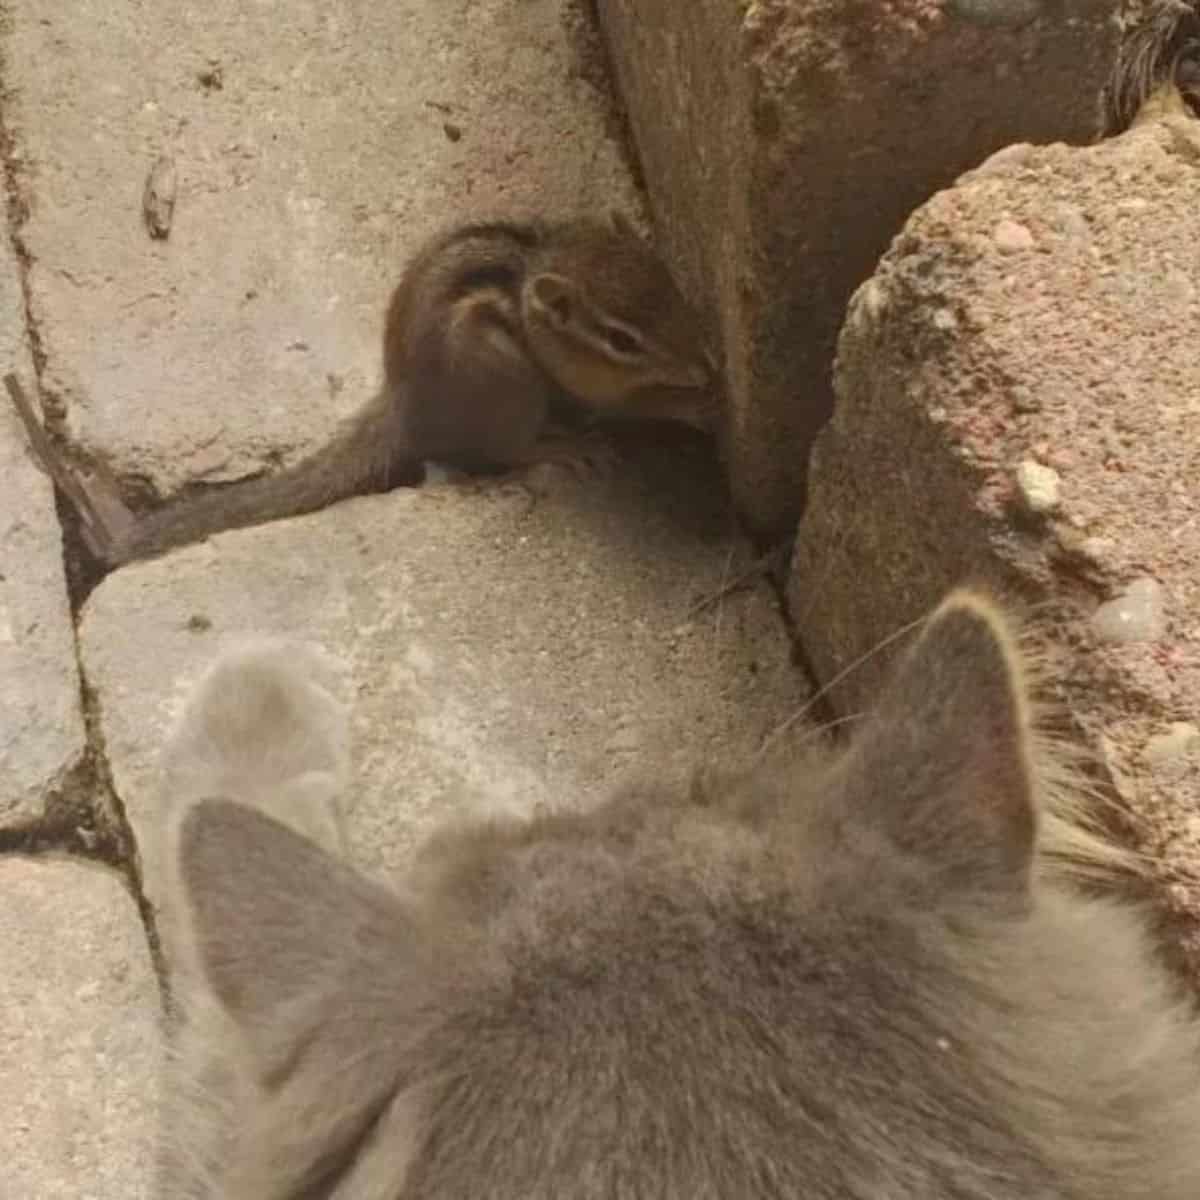 the squirrel approaches the cat